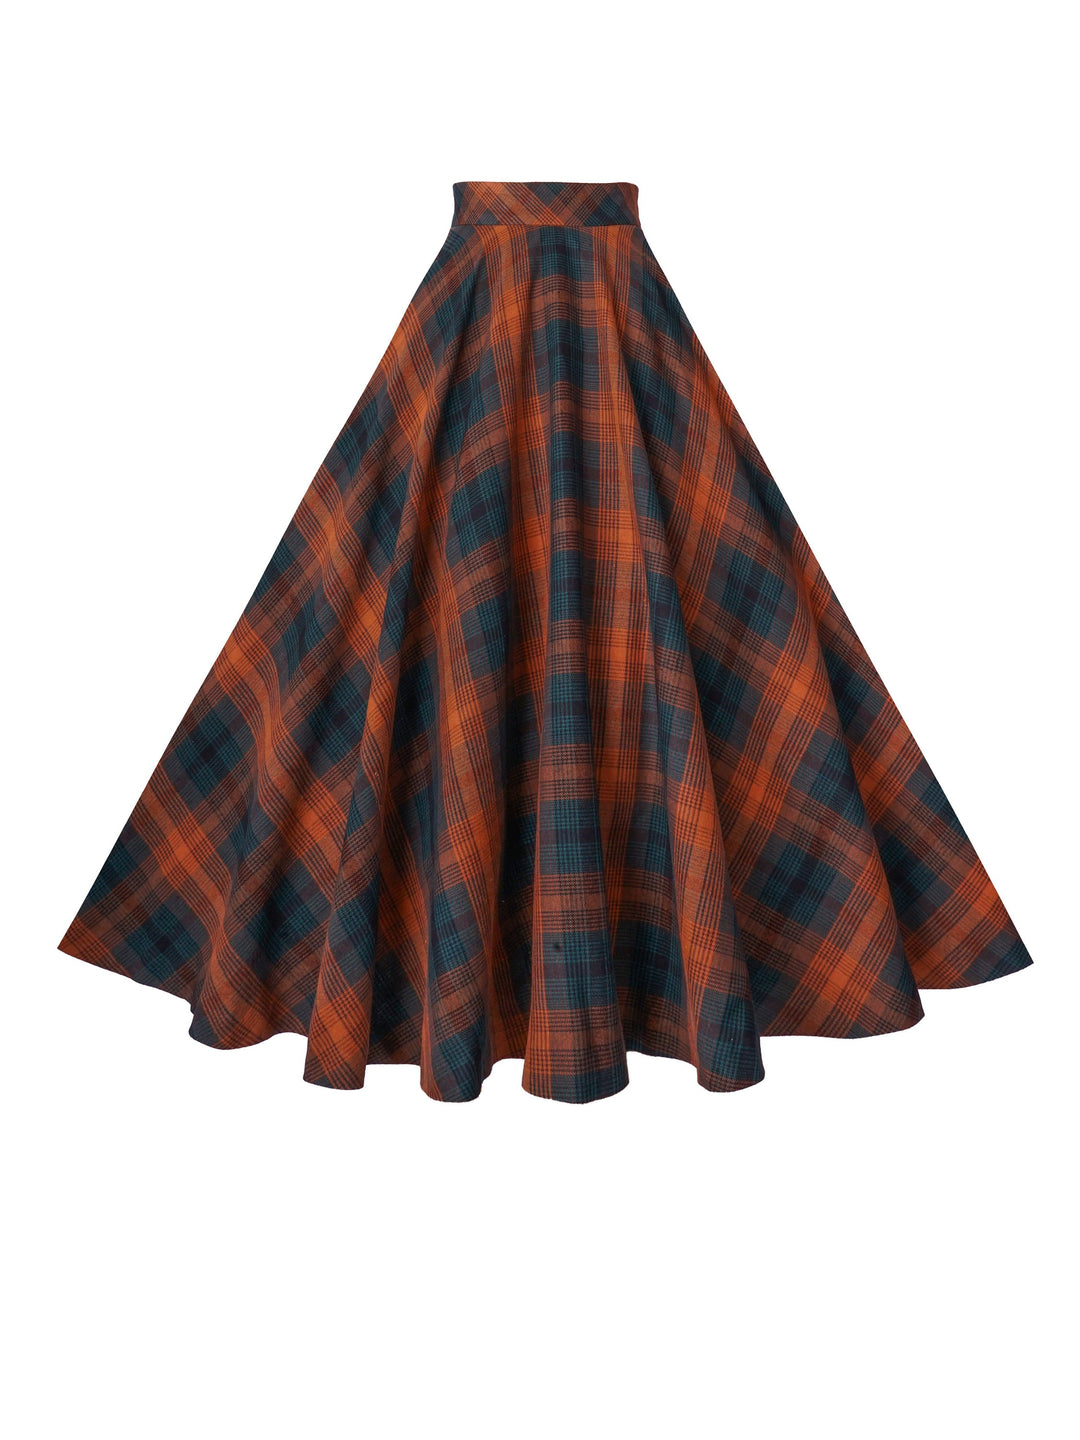 MTO - Lindy Skirt in "Hunters Plaid"